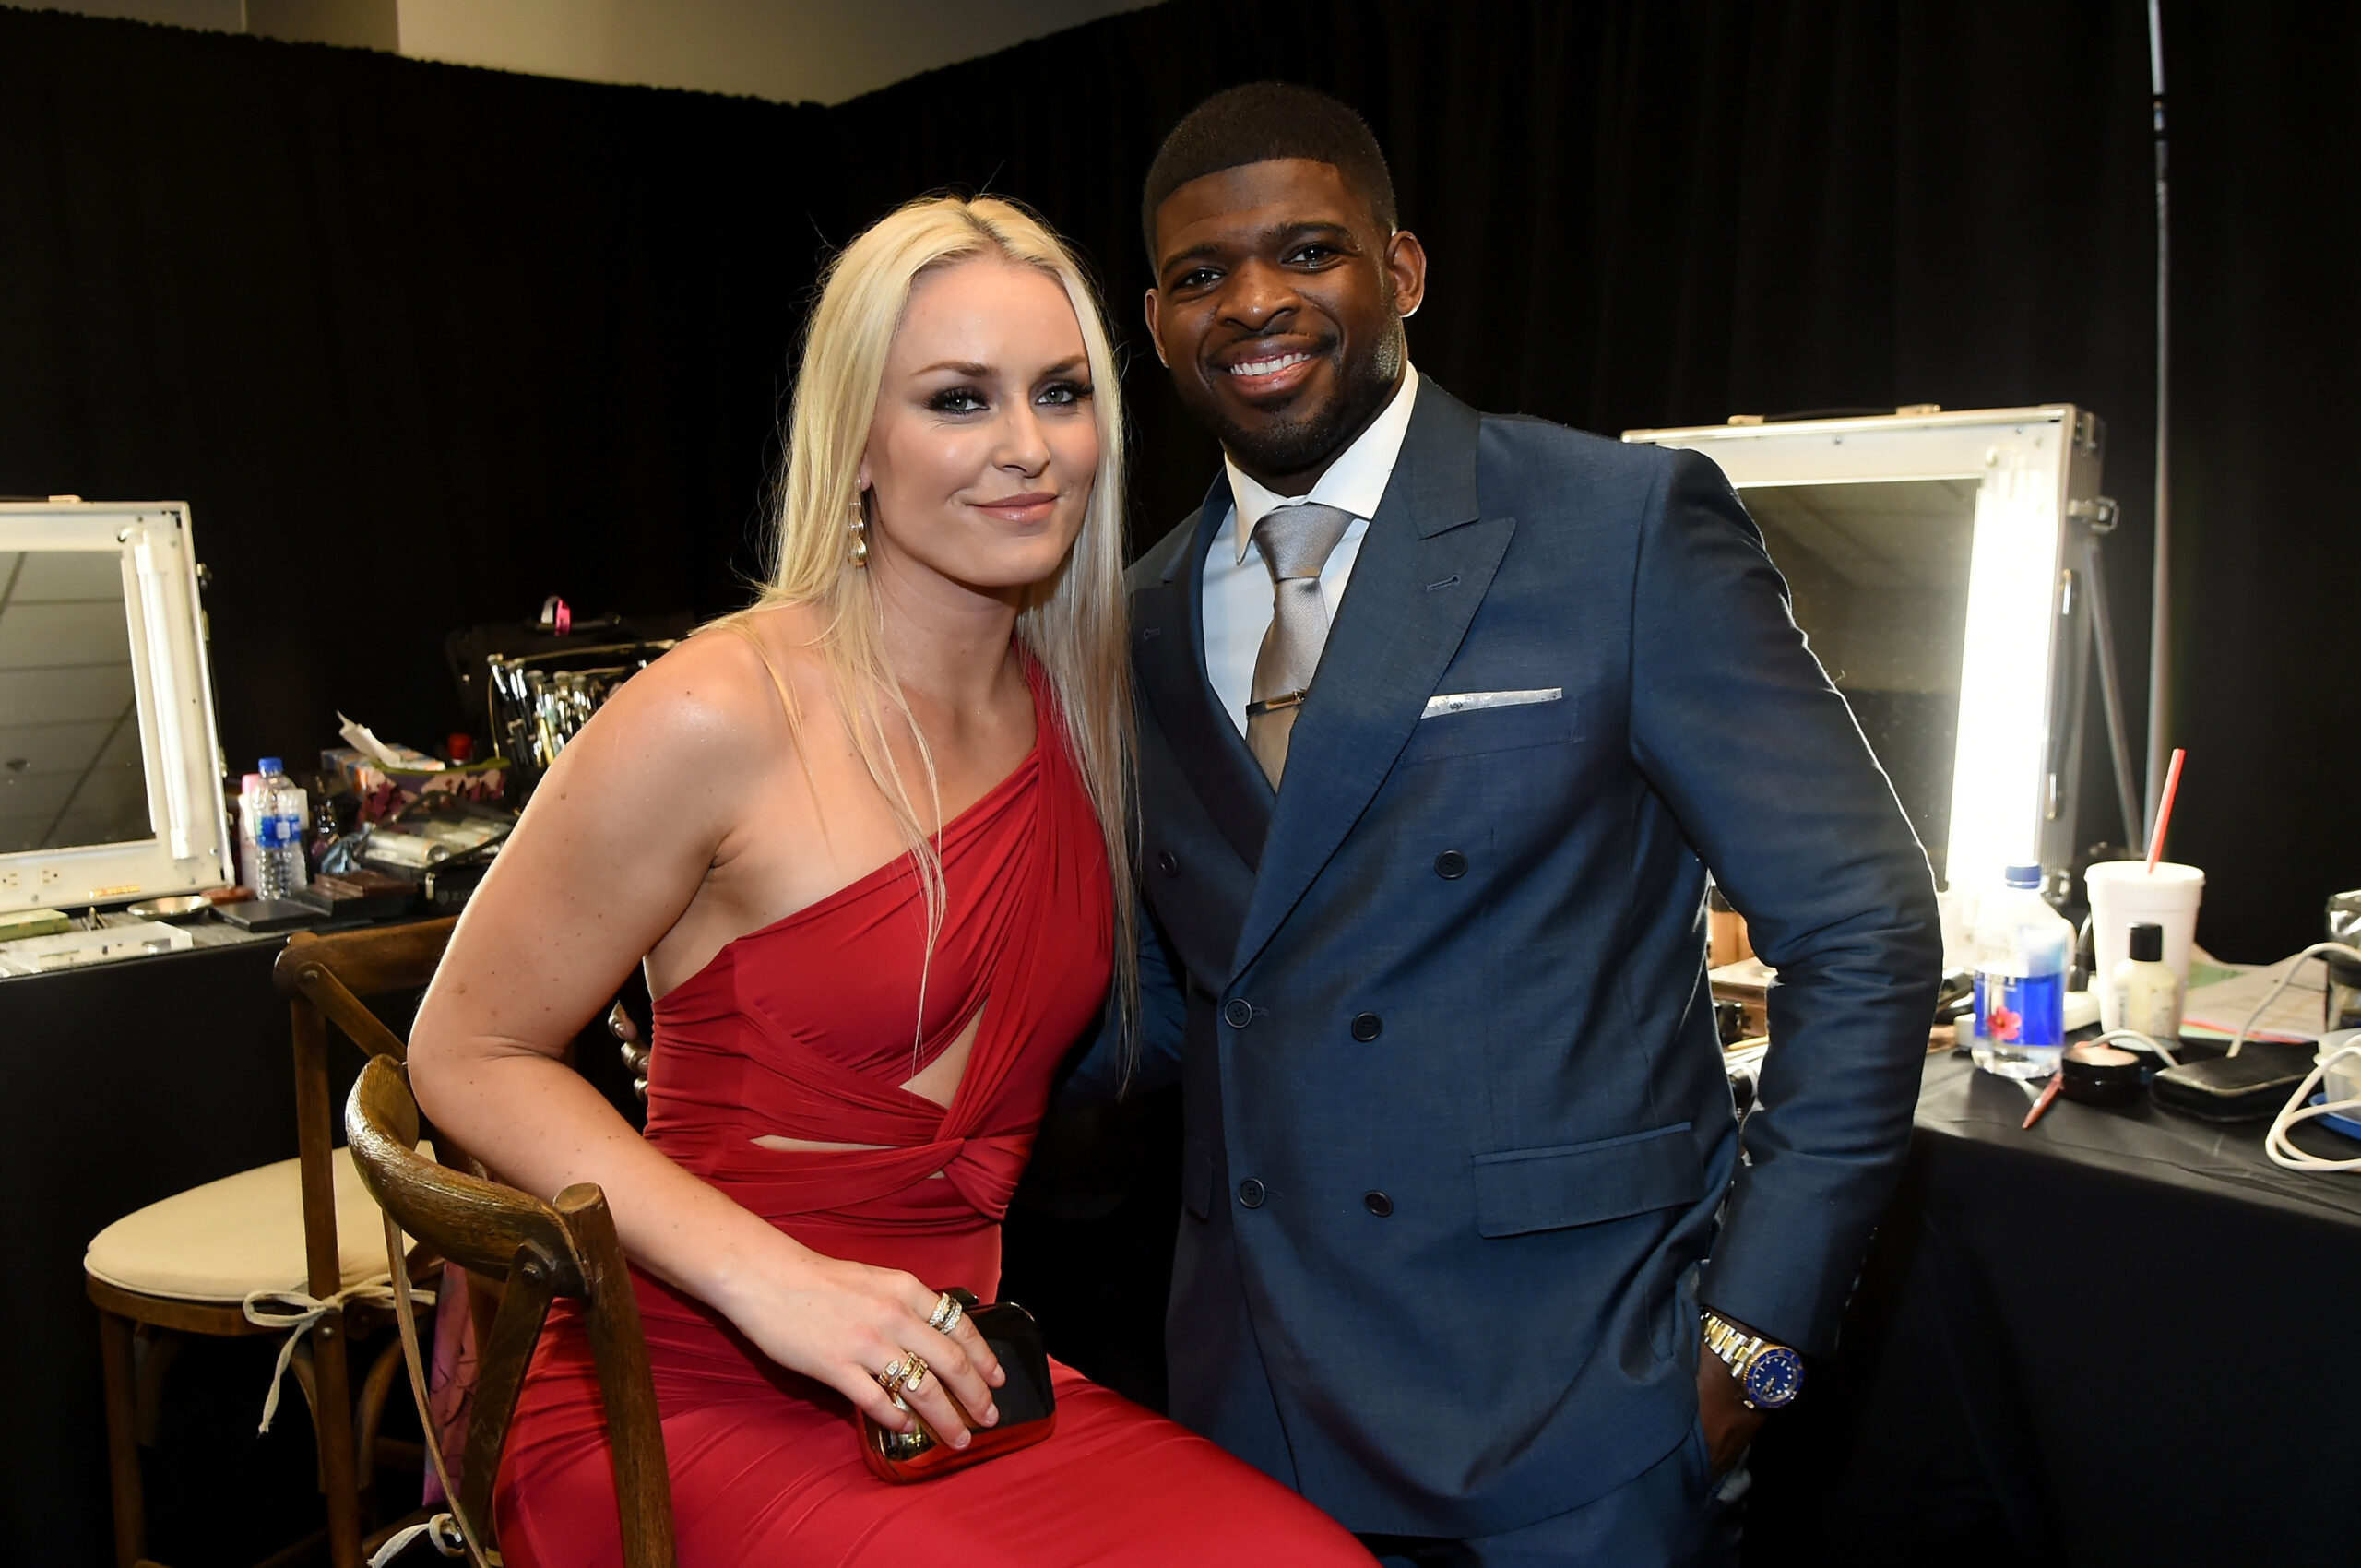 Former Olympian Lindsey Vonn and fiance P.K. Subban call off engagement after three years together